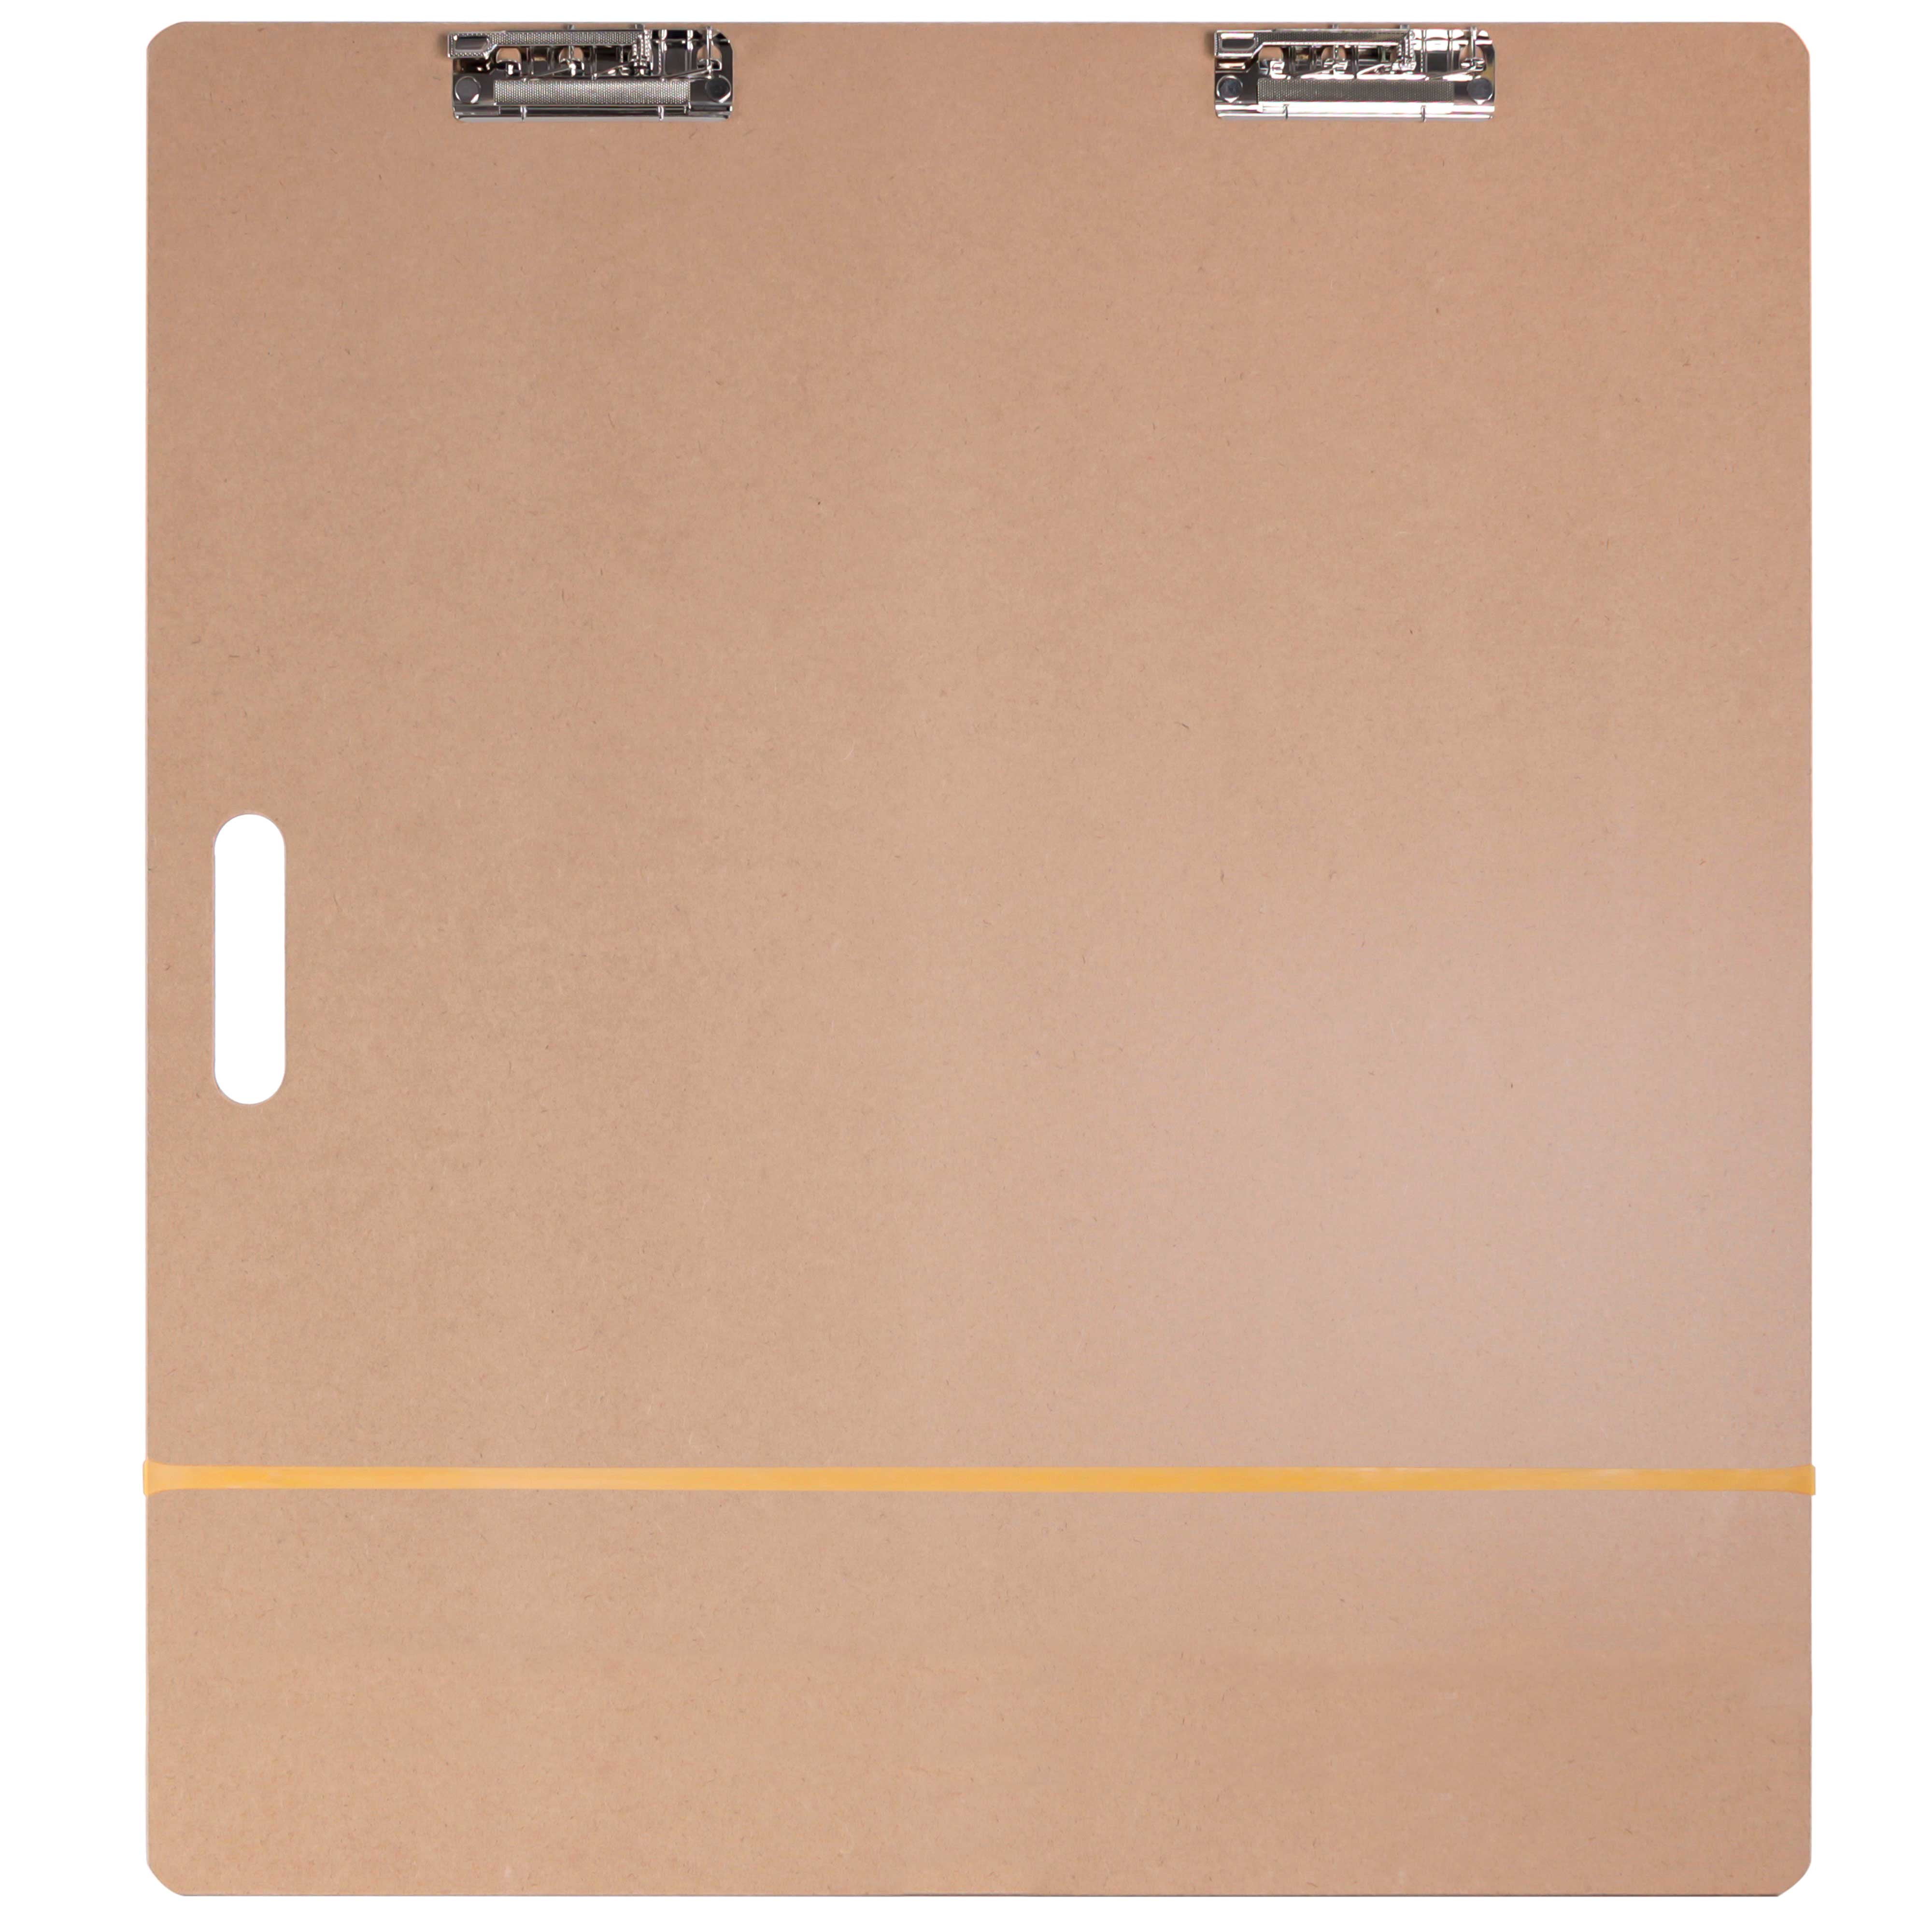 2 Pack 12x18 Clipboard Clipboard for Sketching Large Clip Boards Extra  Large Clipboard 12x18 with 3 Clip Large Clipboard 12x18 for Drawing  Sketching